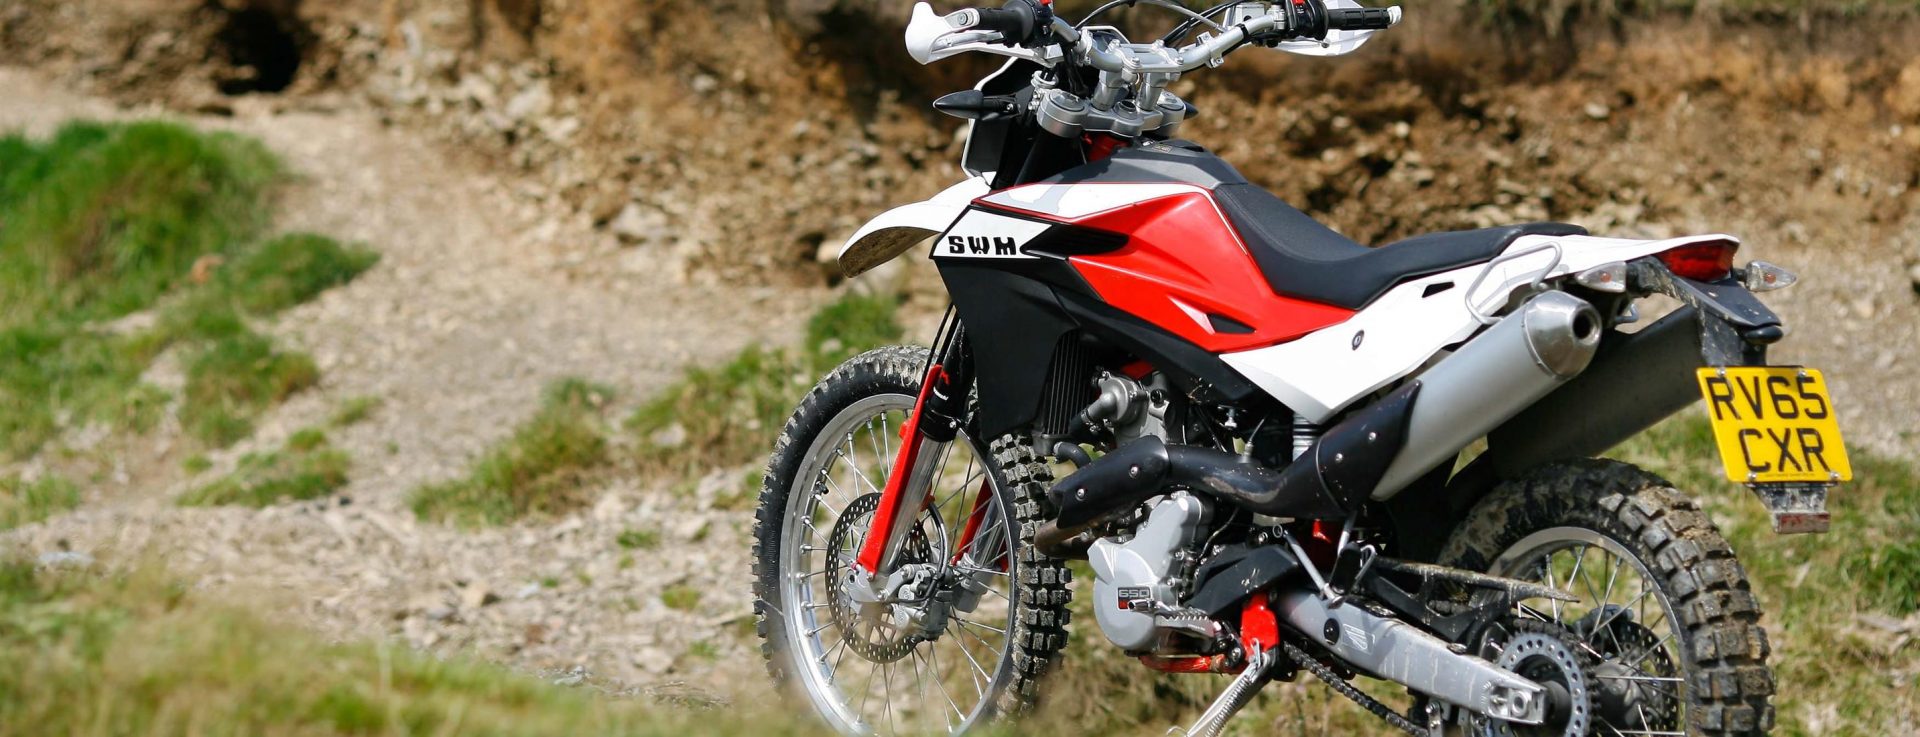 SWM are back, with a neat 600cc thumper trailie